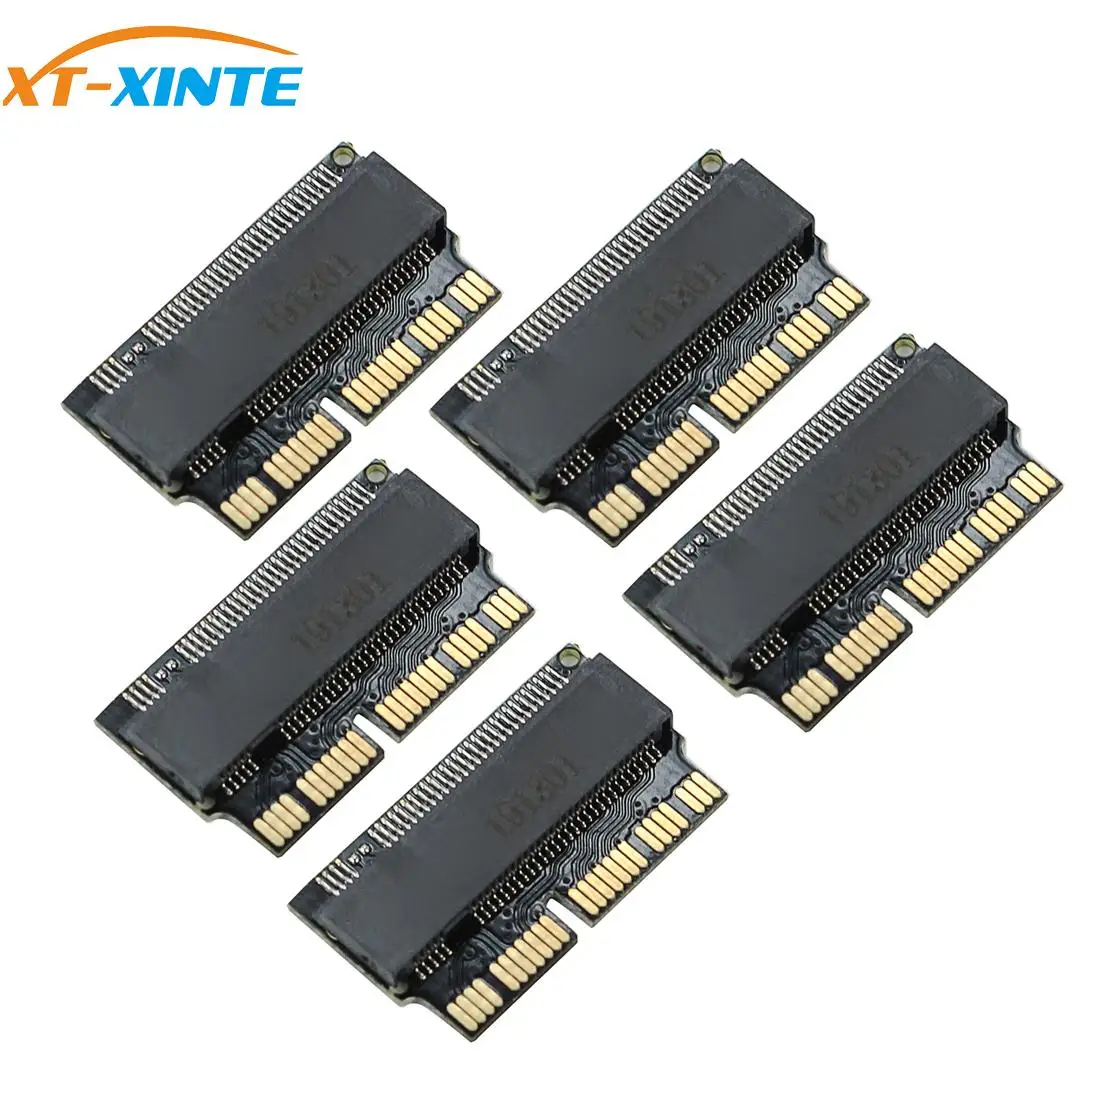 5PCS M.2 Adapter PCIe M2 to SSD for Apple Laptop for Macbook Air Pro 2013 2014 2015 A1465 A1466 A1502 A1398 PCI-E x4 NVMe SSD